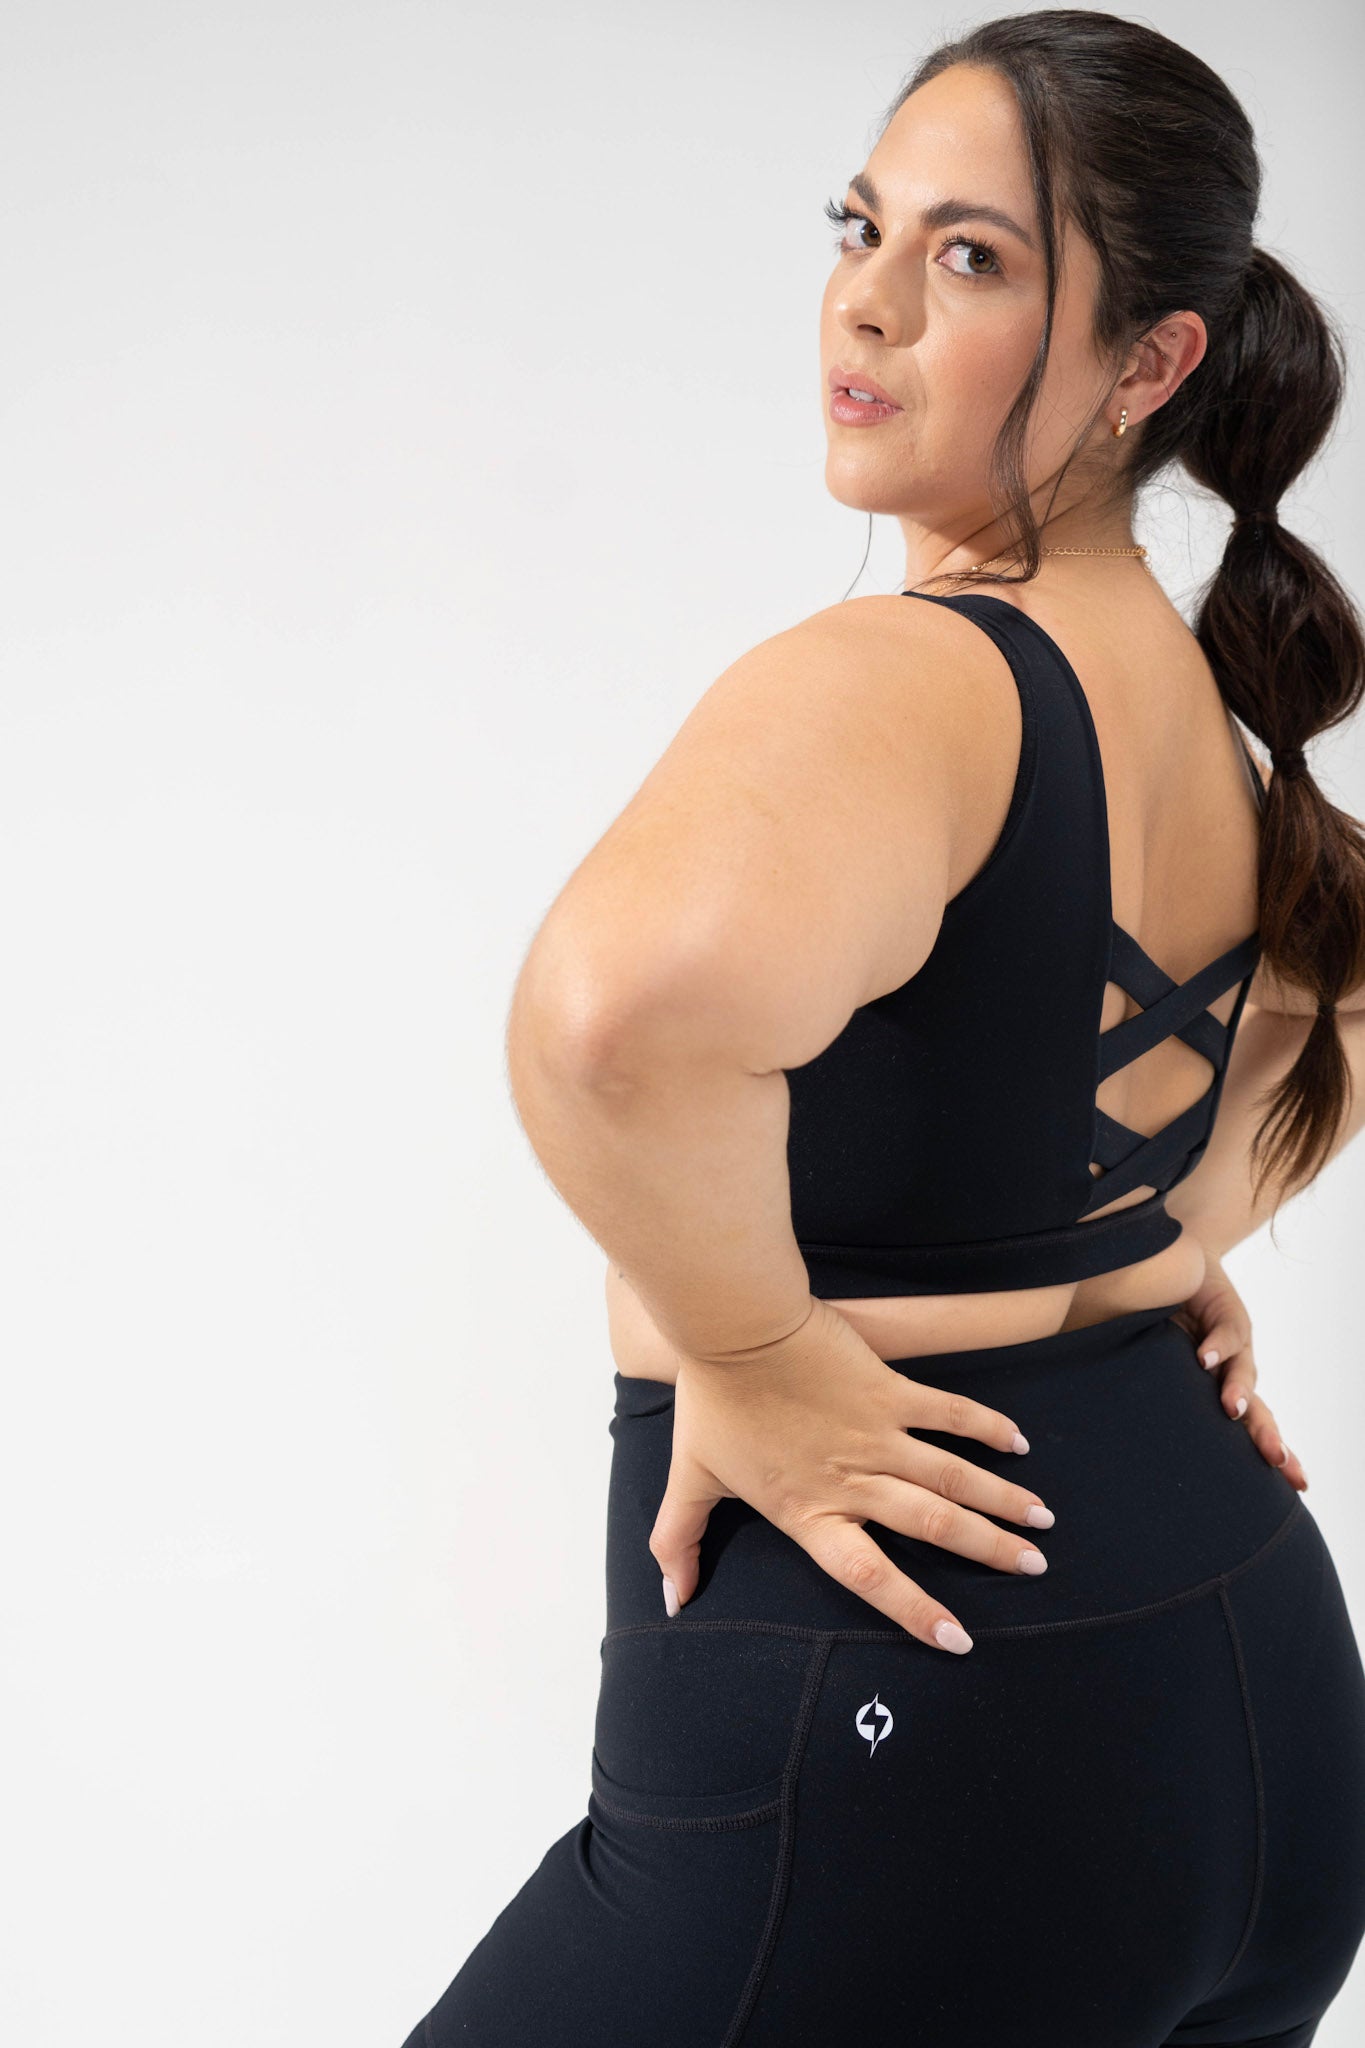 model wears the plus size corset bra in black, cute activewear criss cross sports bra from the POPFLEX basics collection